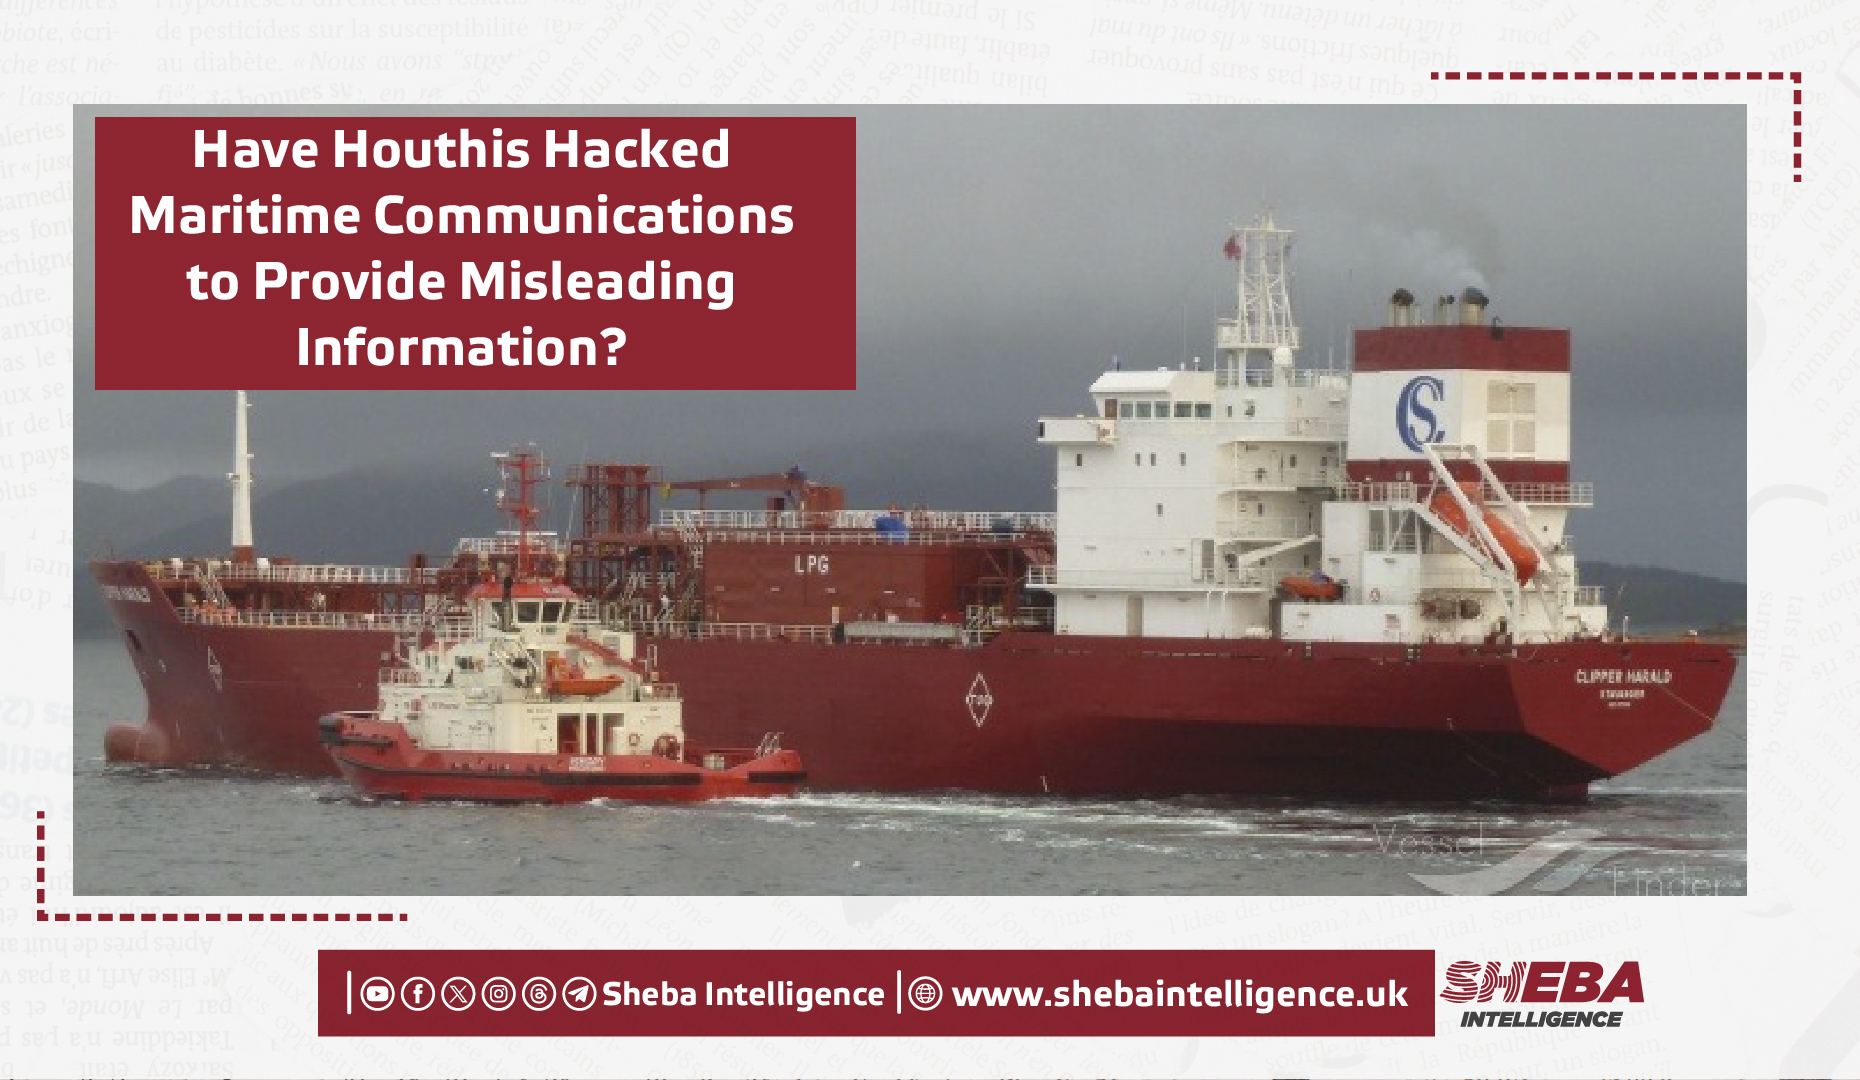 Have Houthis Hacked Maritime Communications to Provide Misleading Information?